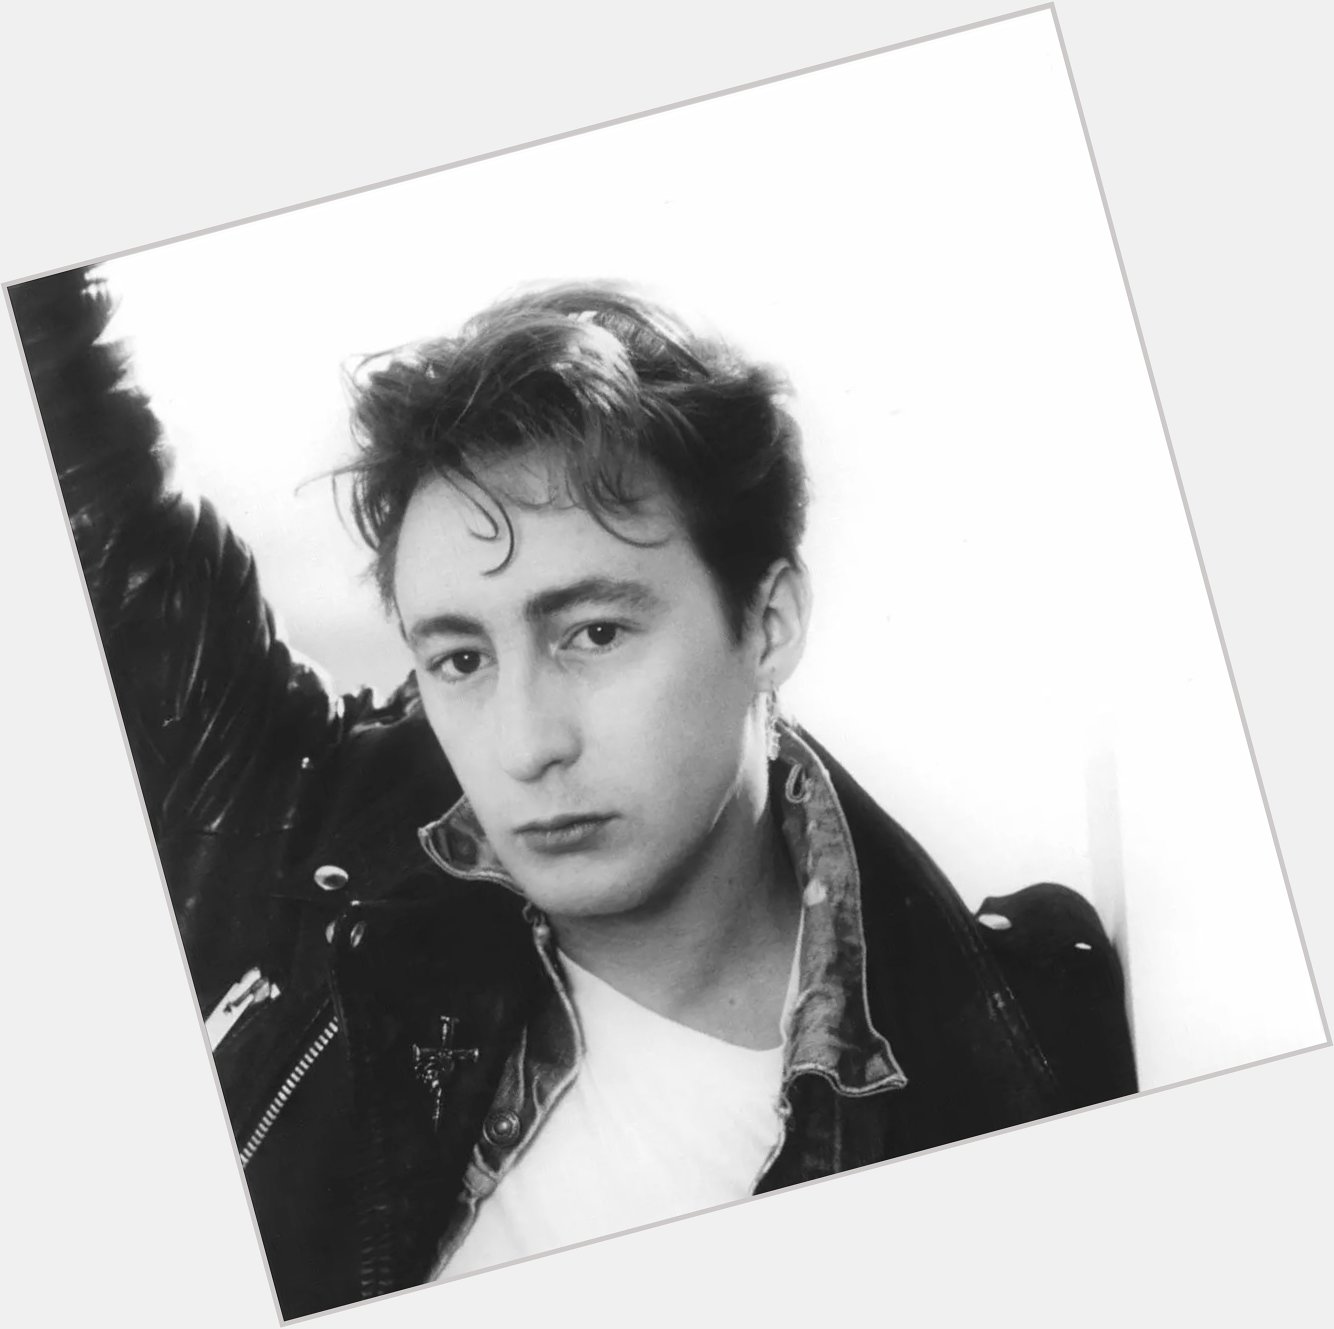 Happy Birthday to singer songwriter Julian Lennon, born on this day in Liverpool in 1963.   